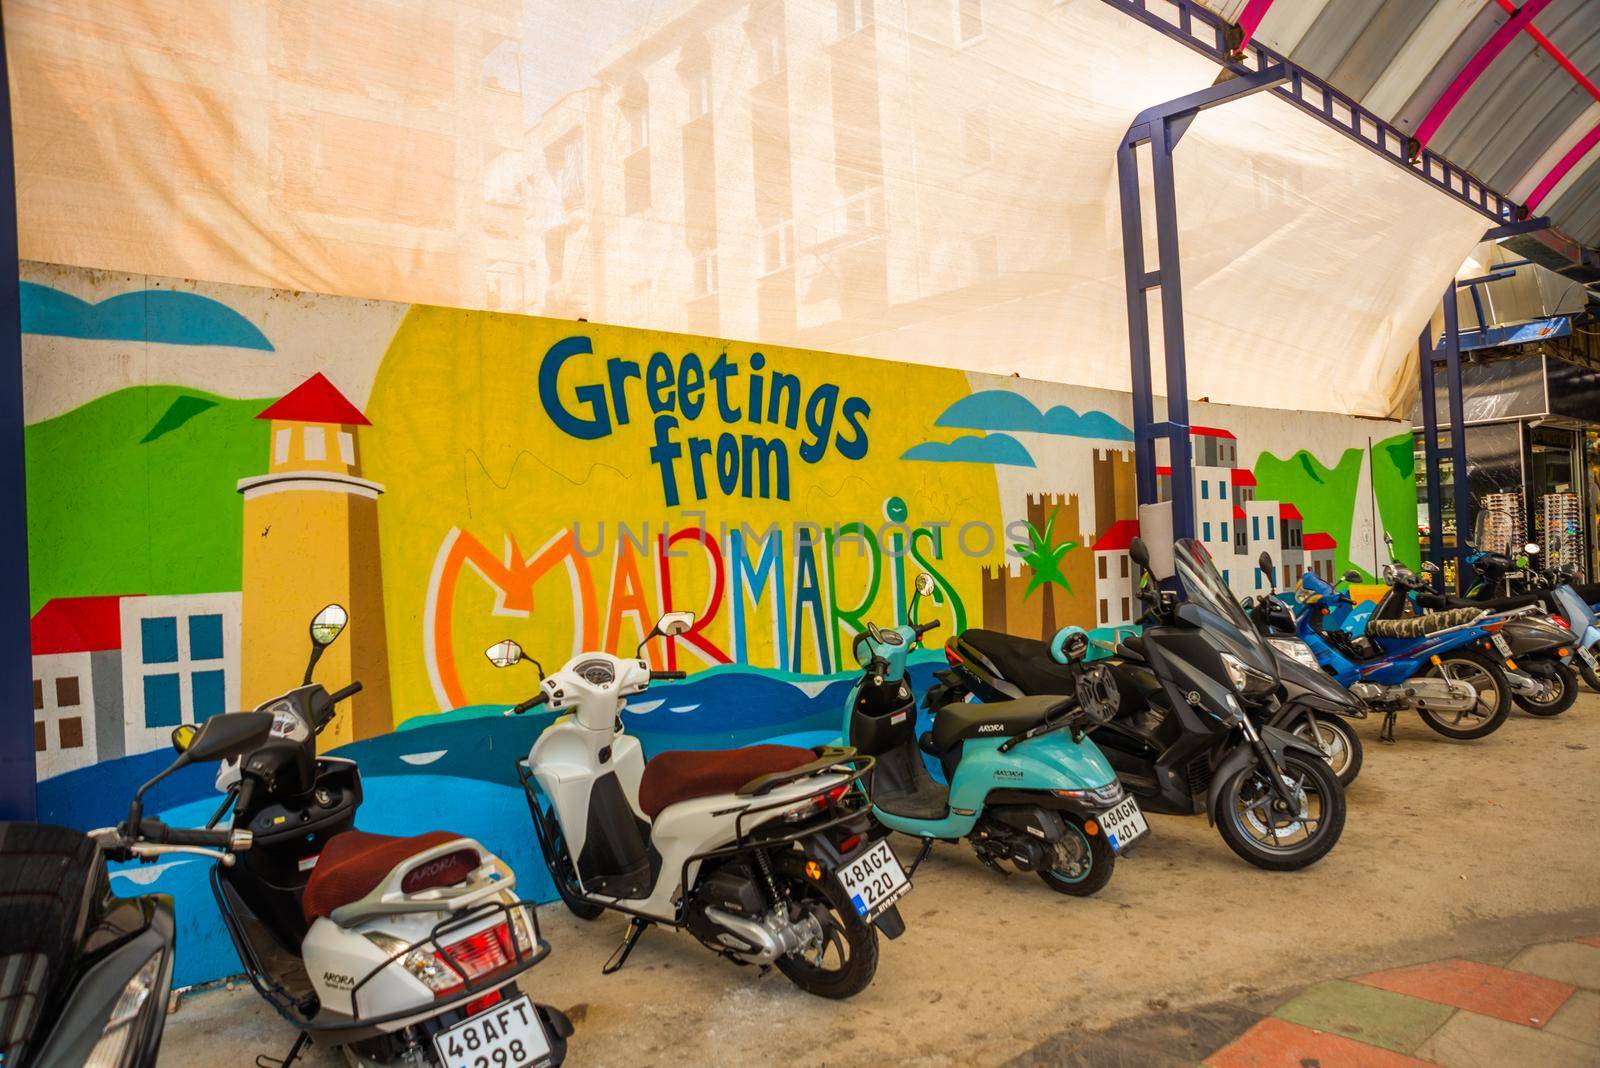 MARMARIS, MUGLA, TURKEY: Motorcycles and scooters are standing at the Drawing on the wall with the inscription Greeting from Marmaris.